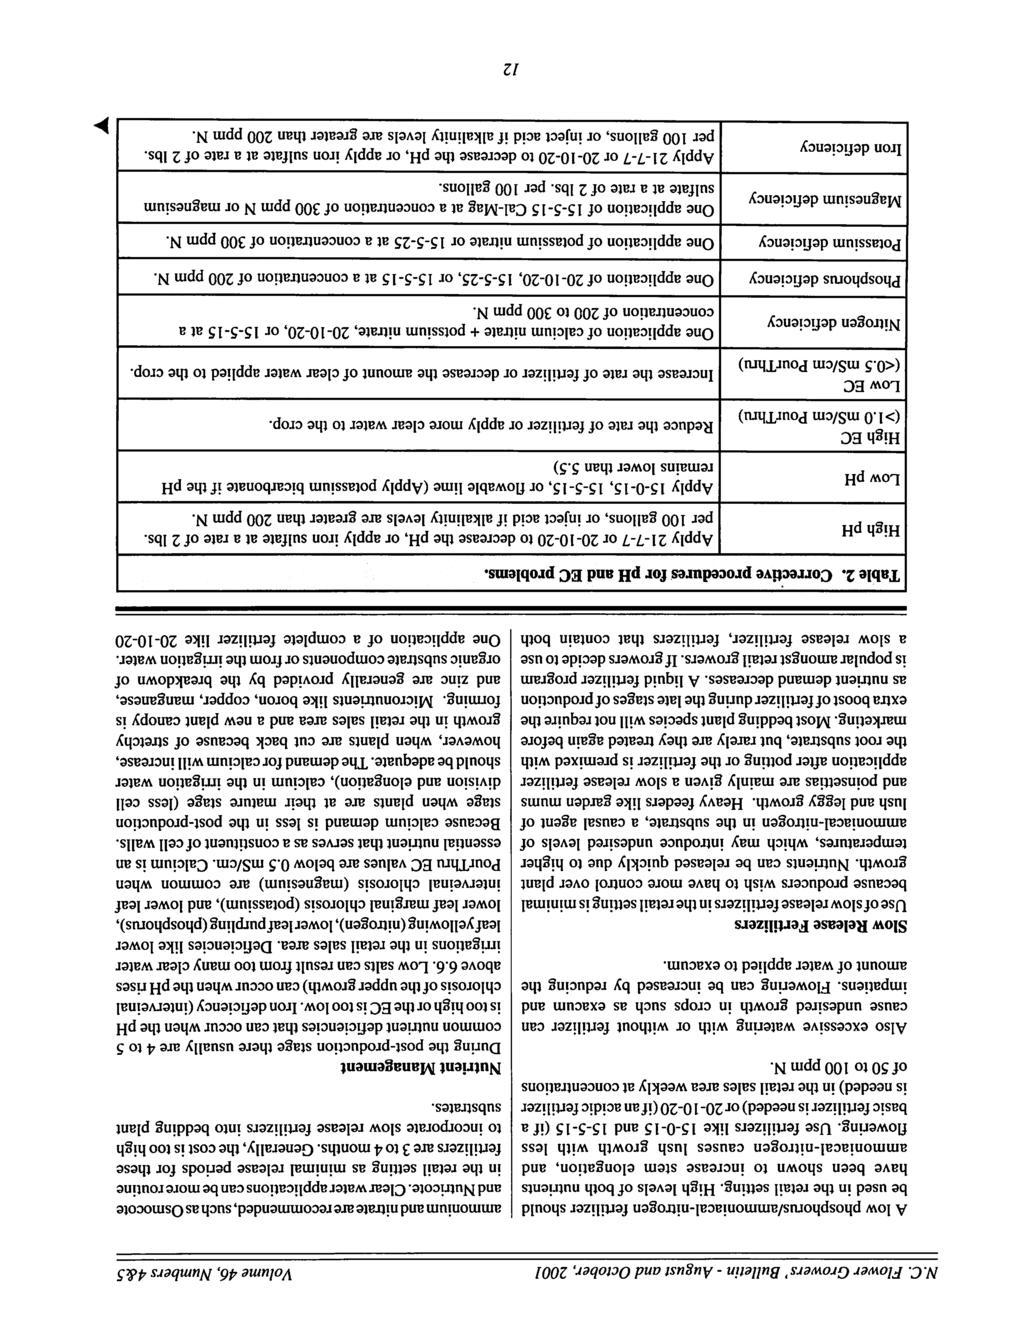 N.C. Flower Growers' Bulletin - August and October, 2001 Volume 46, Numbers 4&5 A low phosphorus/ammoniacal-nitrogen fertilizer should be used in the retail setting.